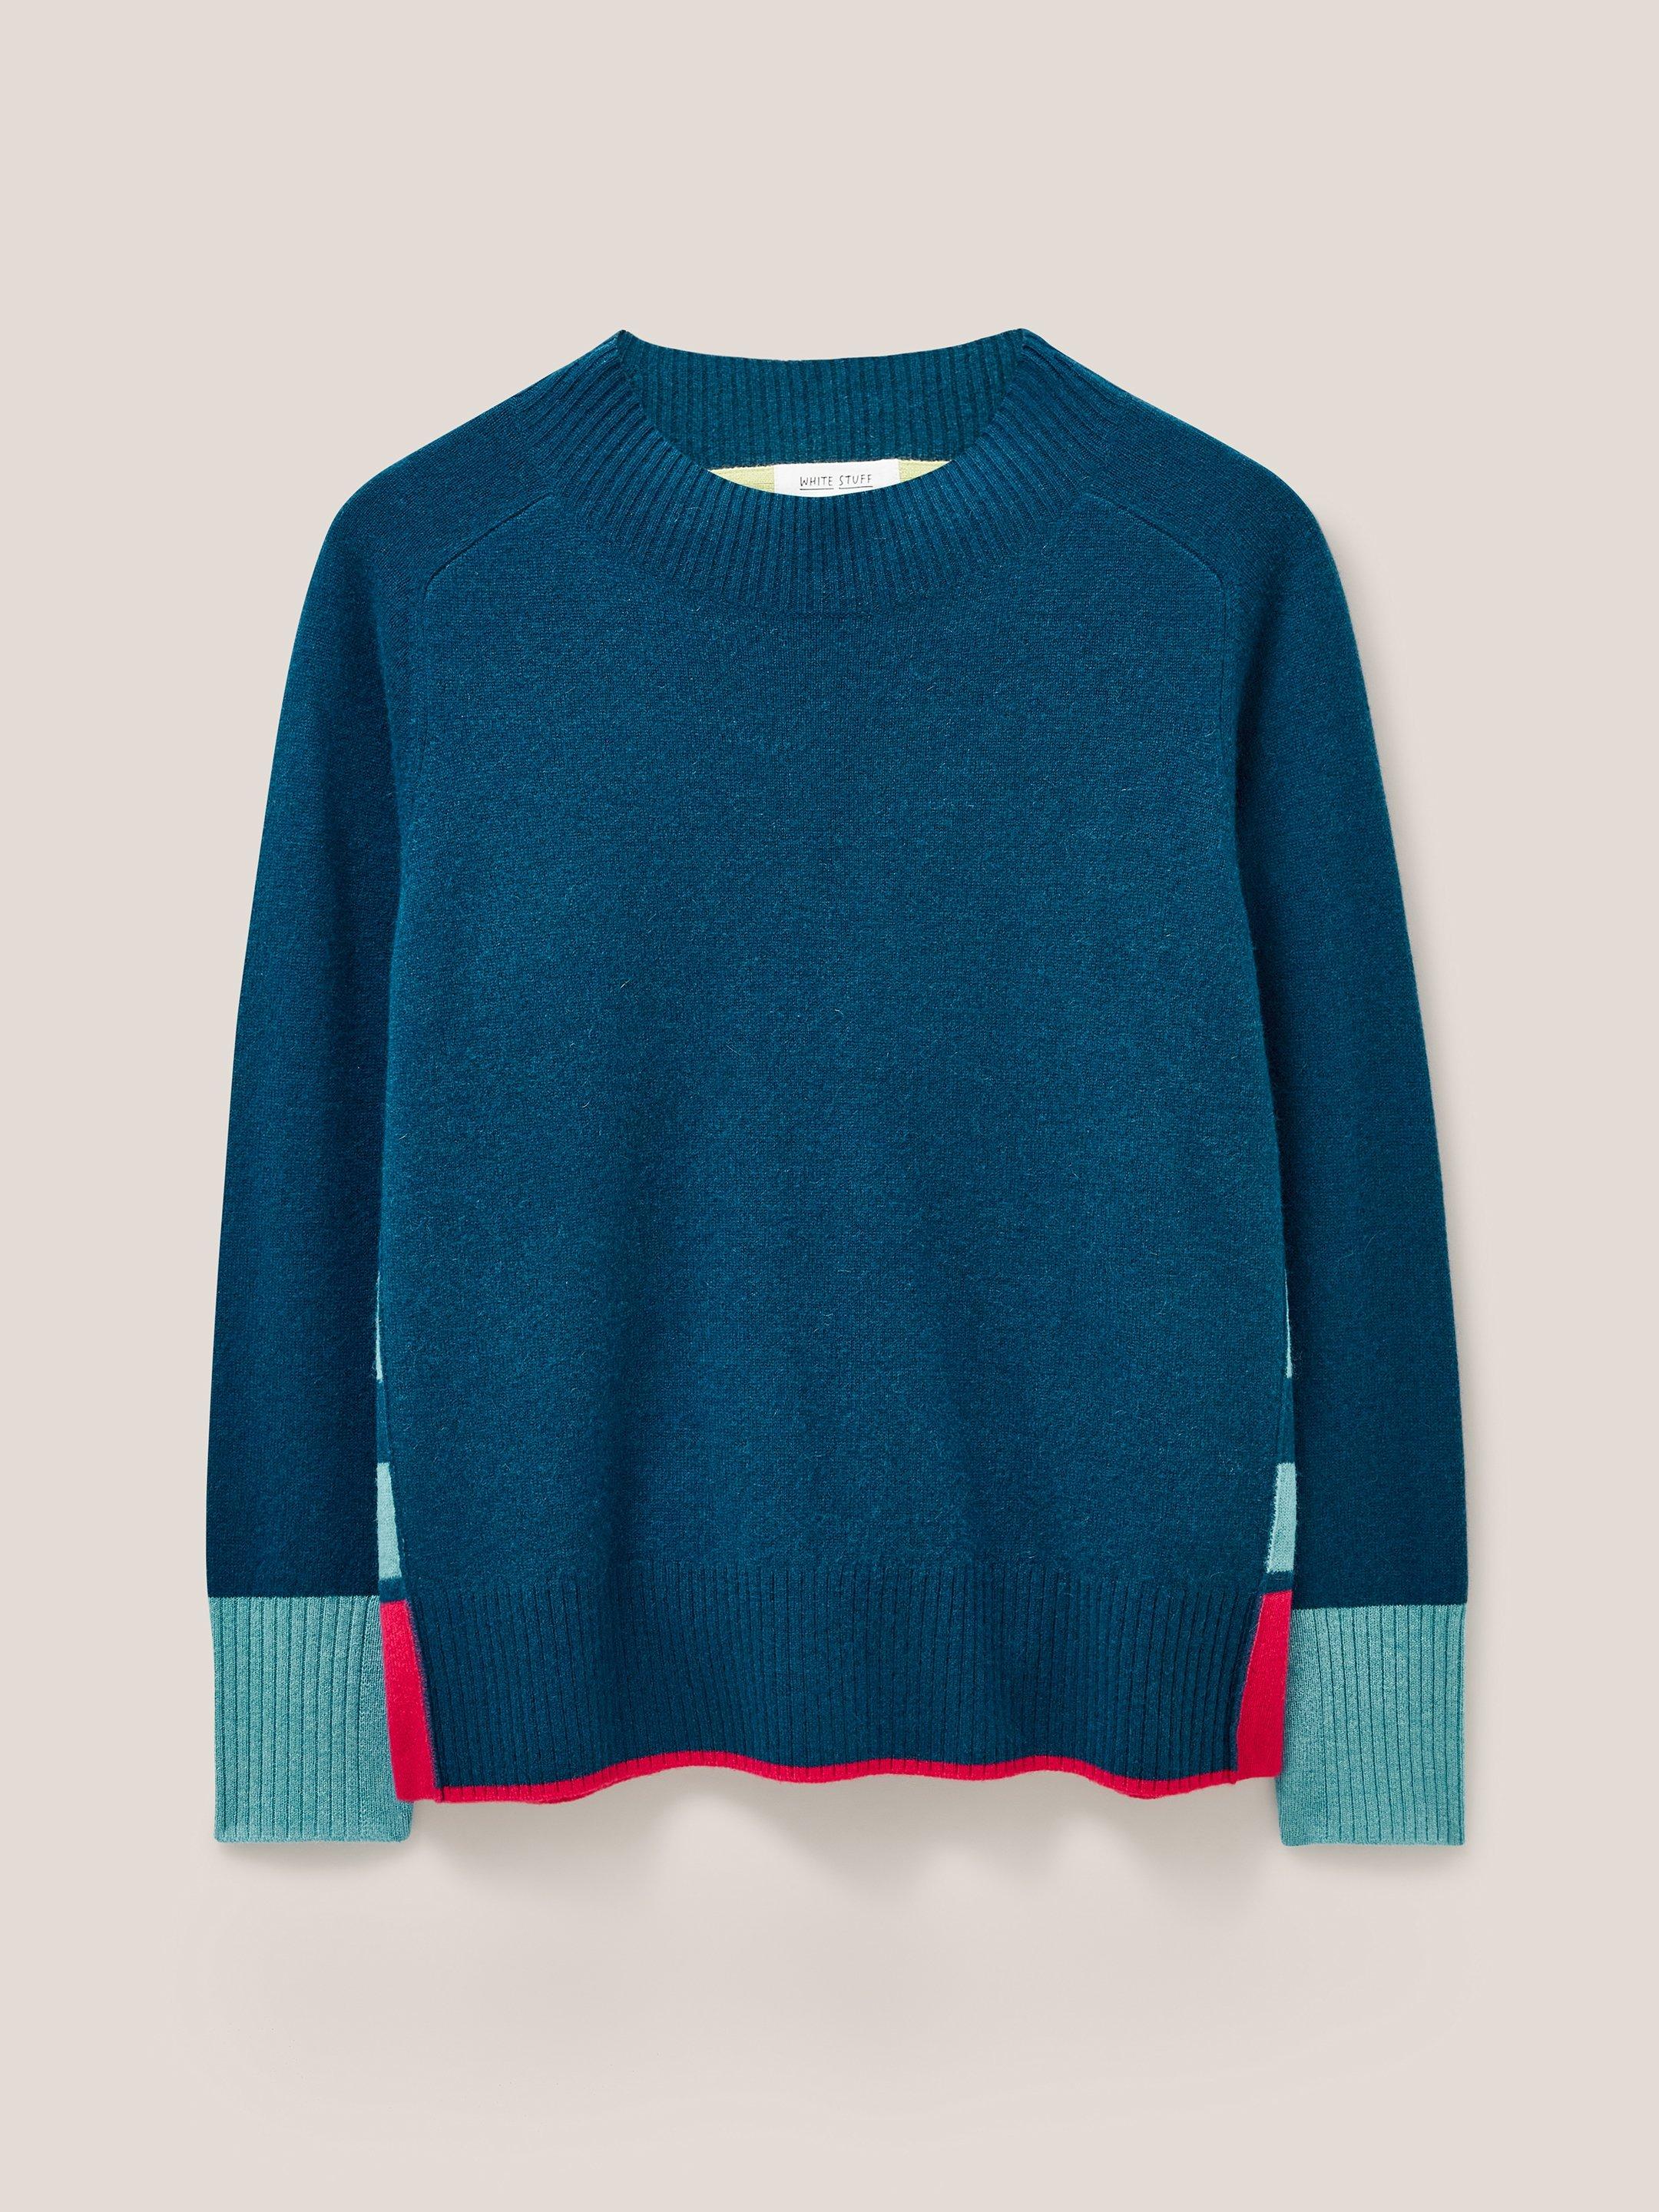 CORA CREW NECK CASHMERE JUMPER in NAVY MULTI - FLAT FRONT